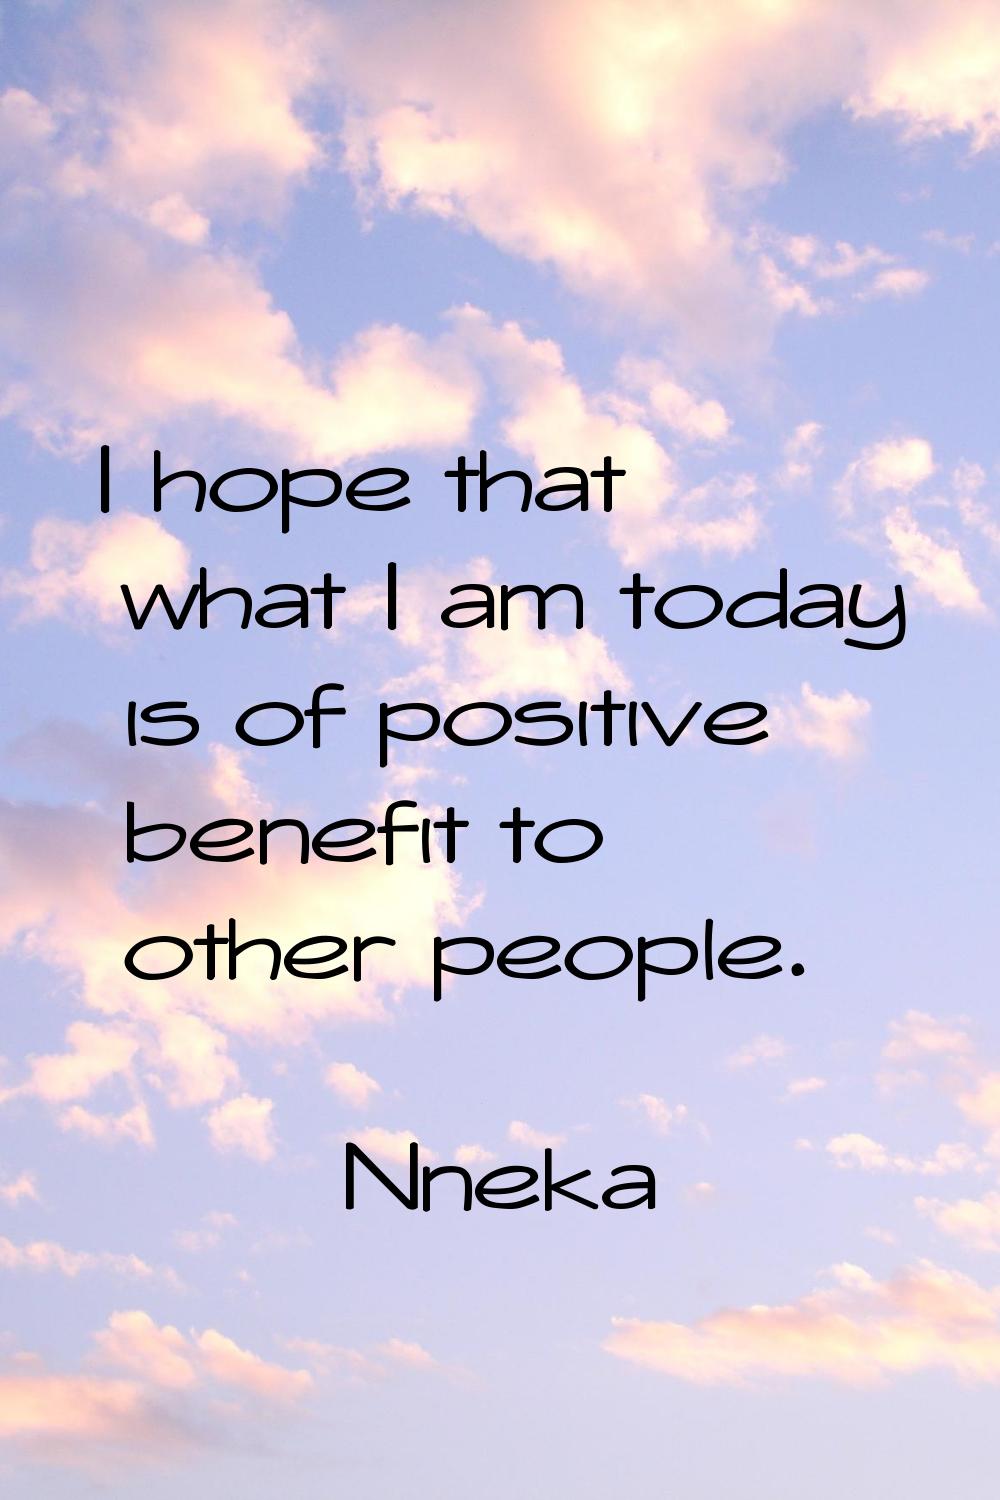 I hope that what I am today is of positive benefit to other people.